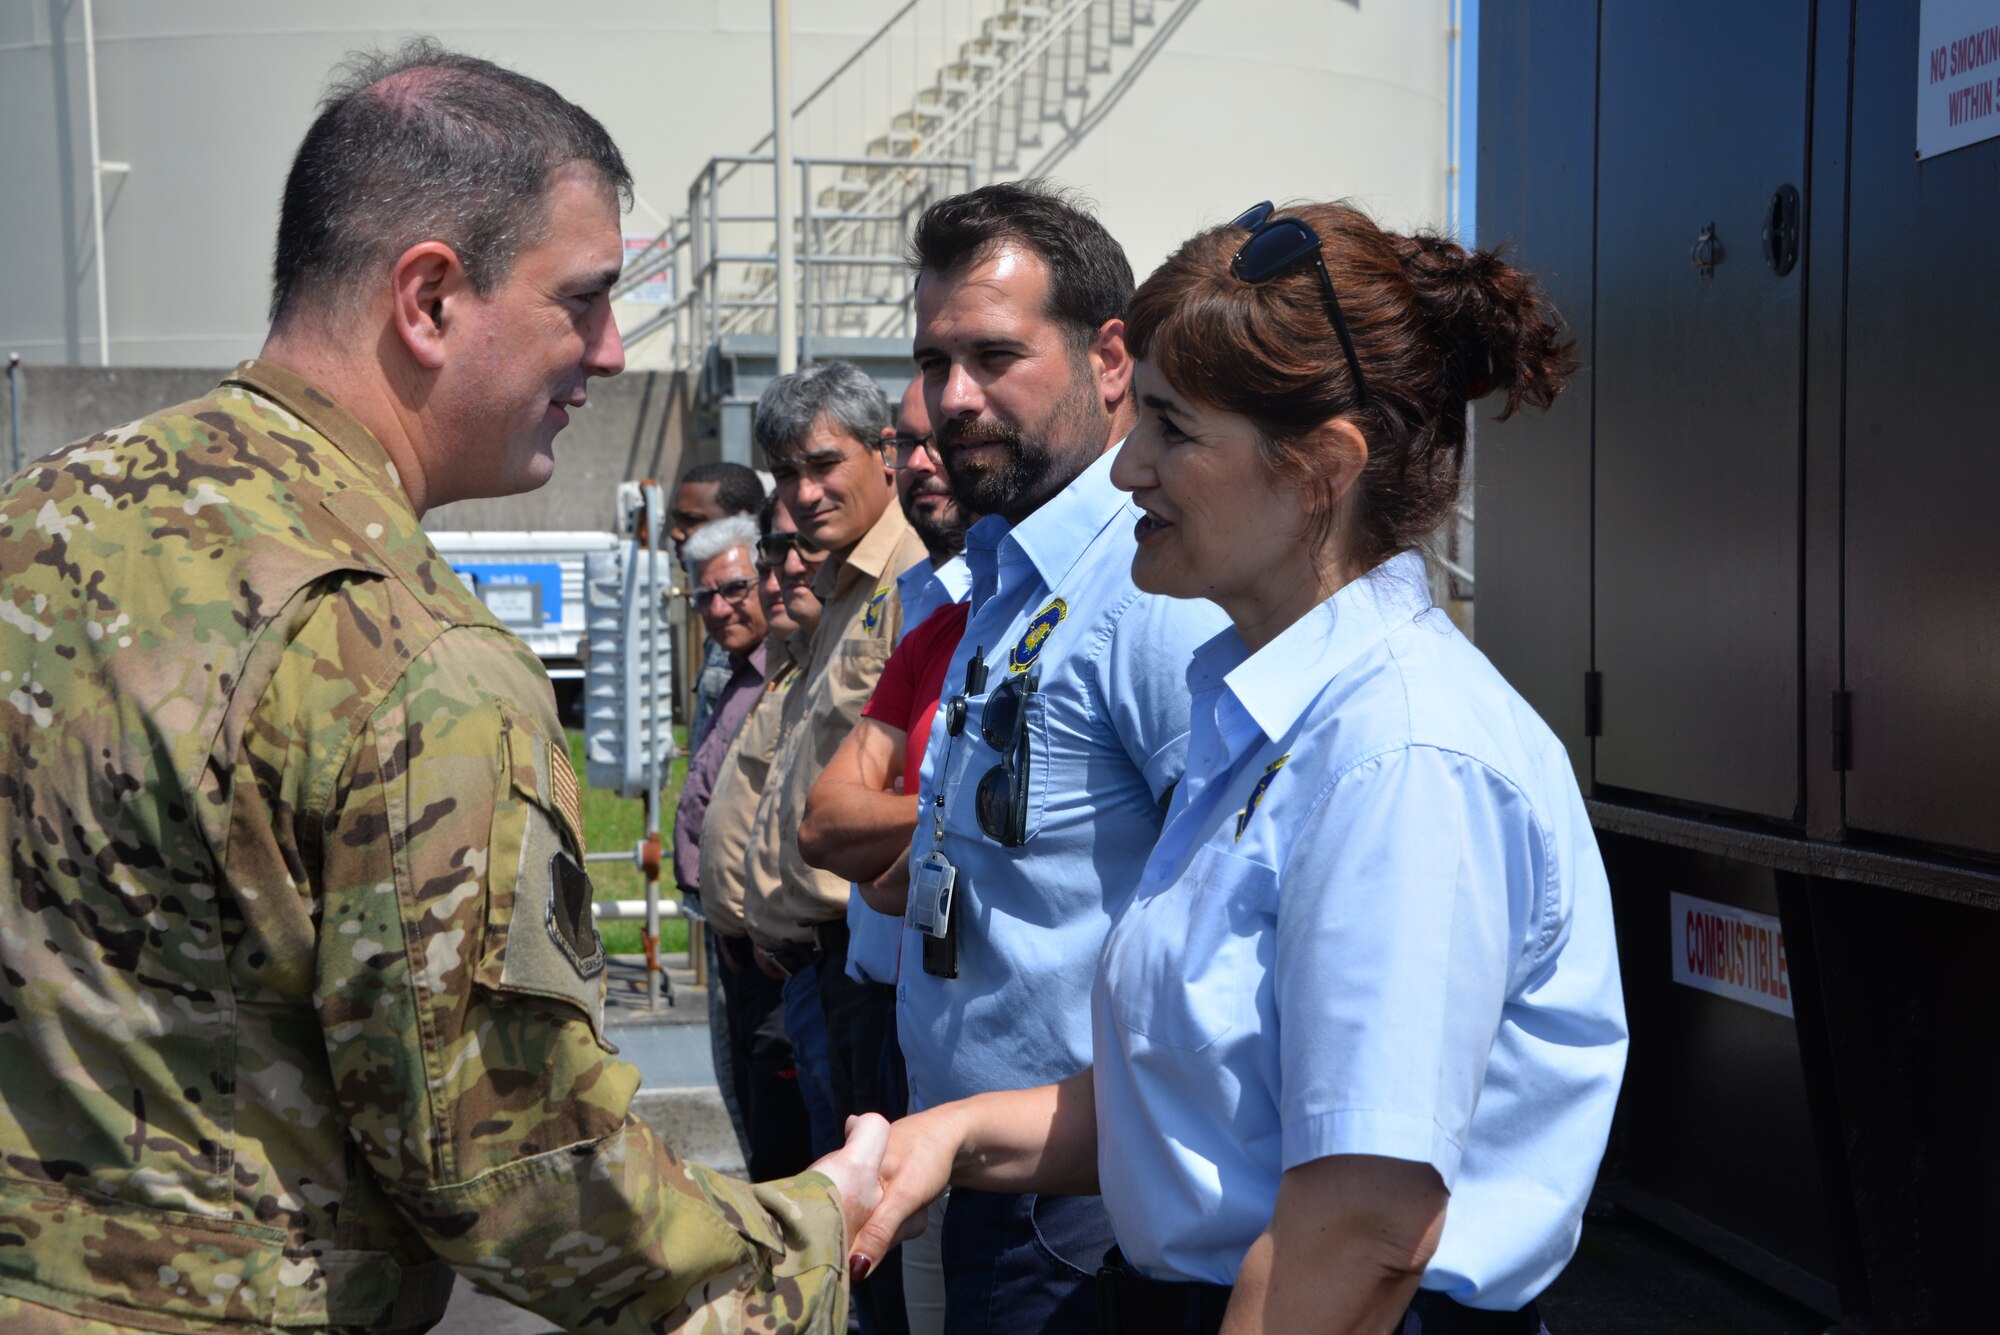 U.S. Air Force Brig. Gen. Mark R. August shakes hands with Mrs. Maria Costa as her teammate, Mr. Dinarco Coelho, looks on.  Both are 65th Logistics Readiness Squadron fuels distribution system workers who were named Airlifters of the Week 12 June for quickly reacting and putting out a fire at Lajes Field on May 23rd. (U.S. Air Force Photo by Rick Baptista)